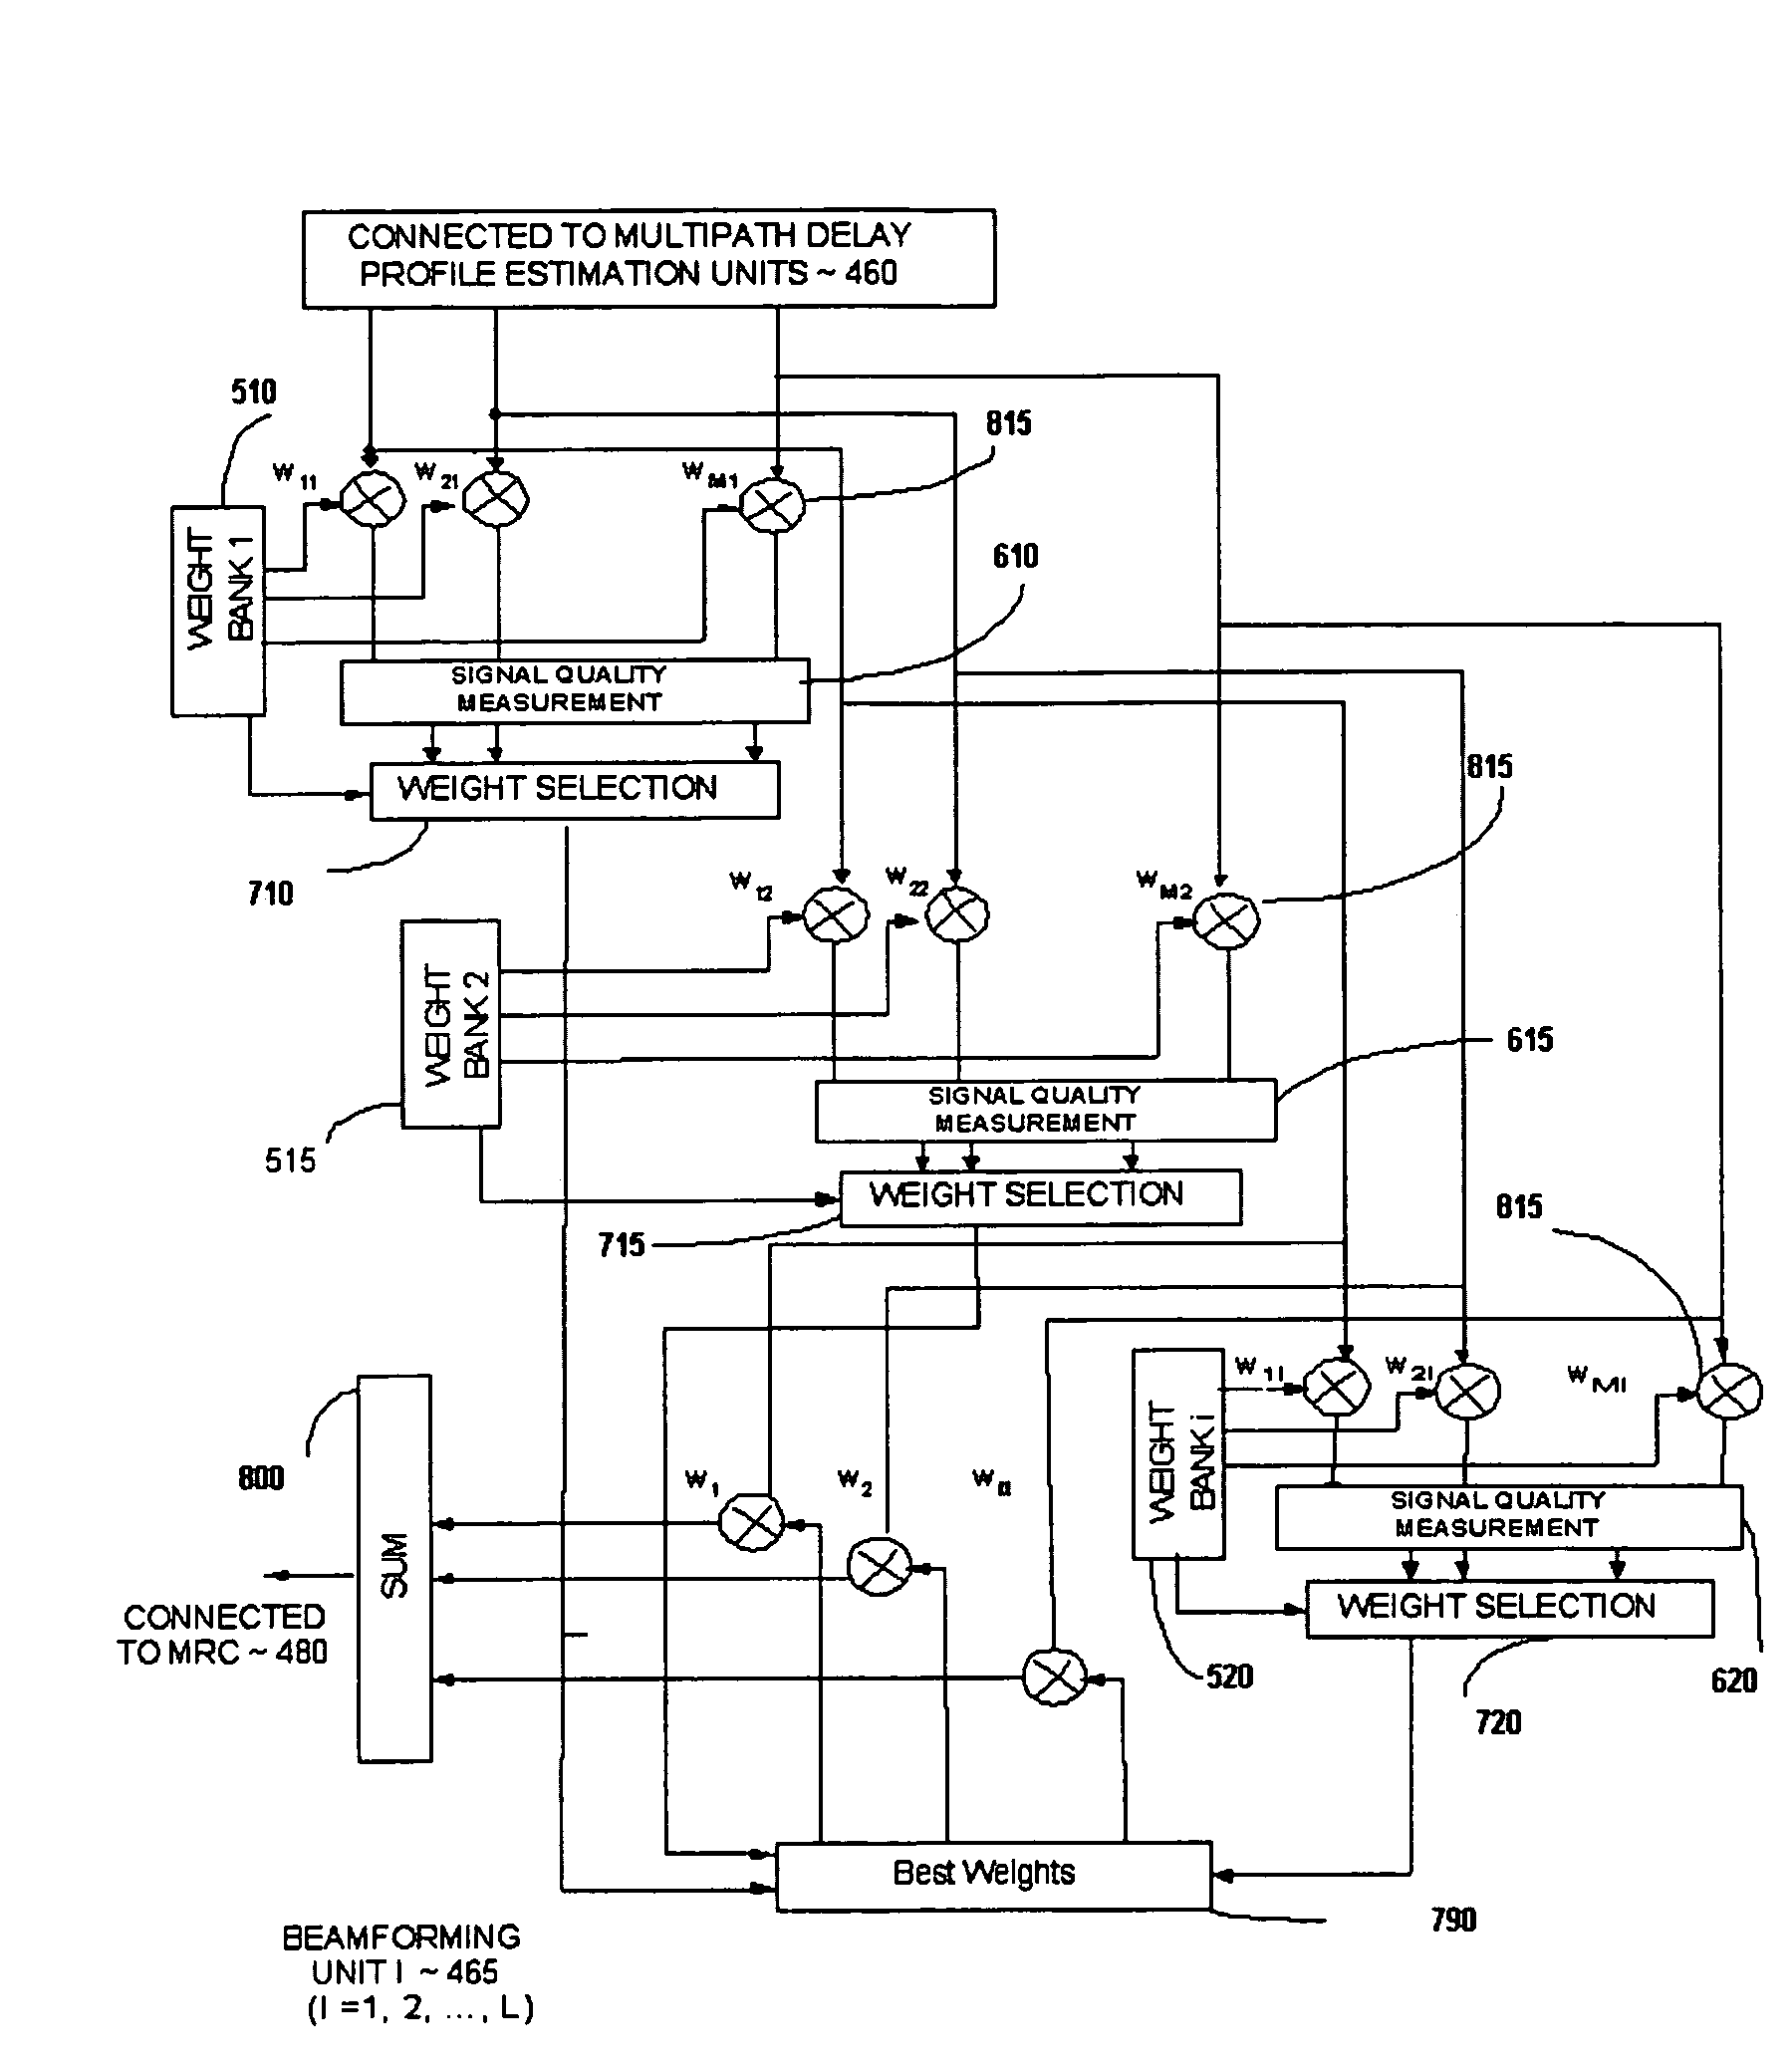 Adaptive beam-forming system using hierarchical weight banks for antenna array in wireless communication system